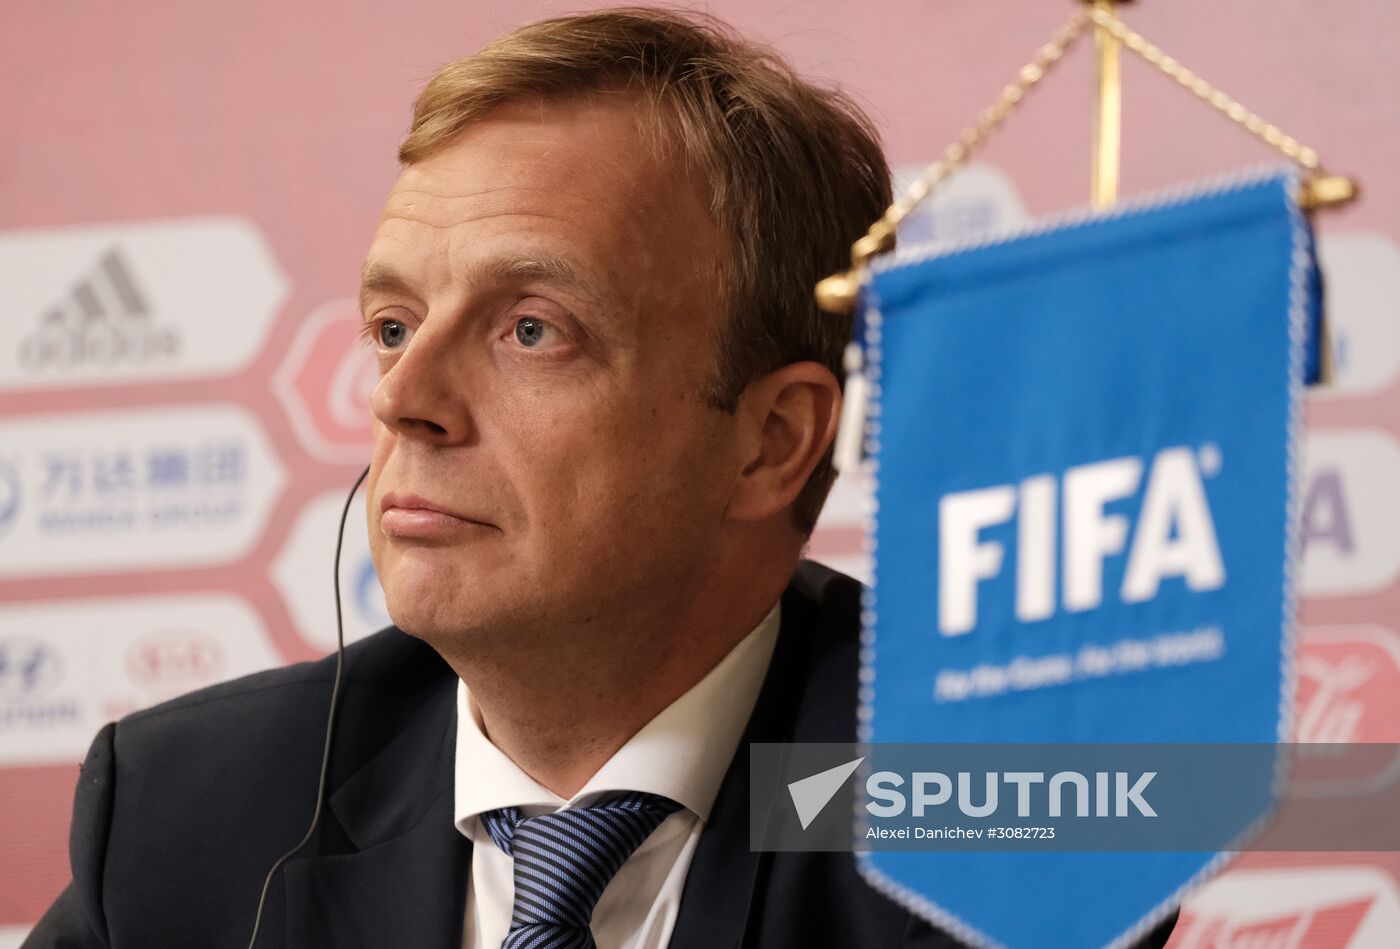 Press briefing following meeting of 2018 FIFA World Cup Russia Organizing Committee's Council and FIFA